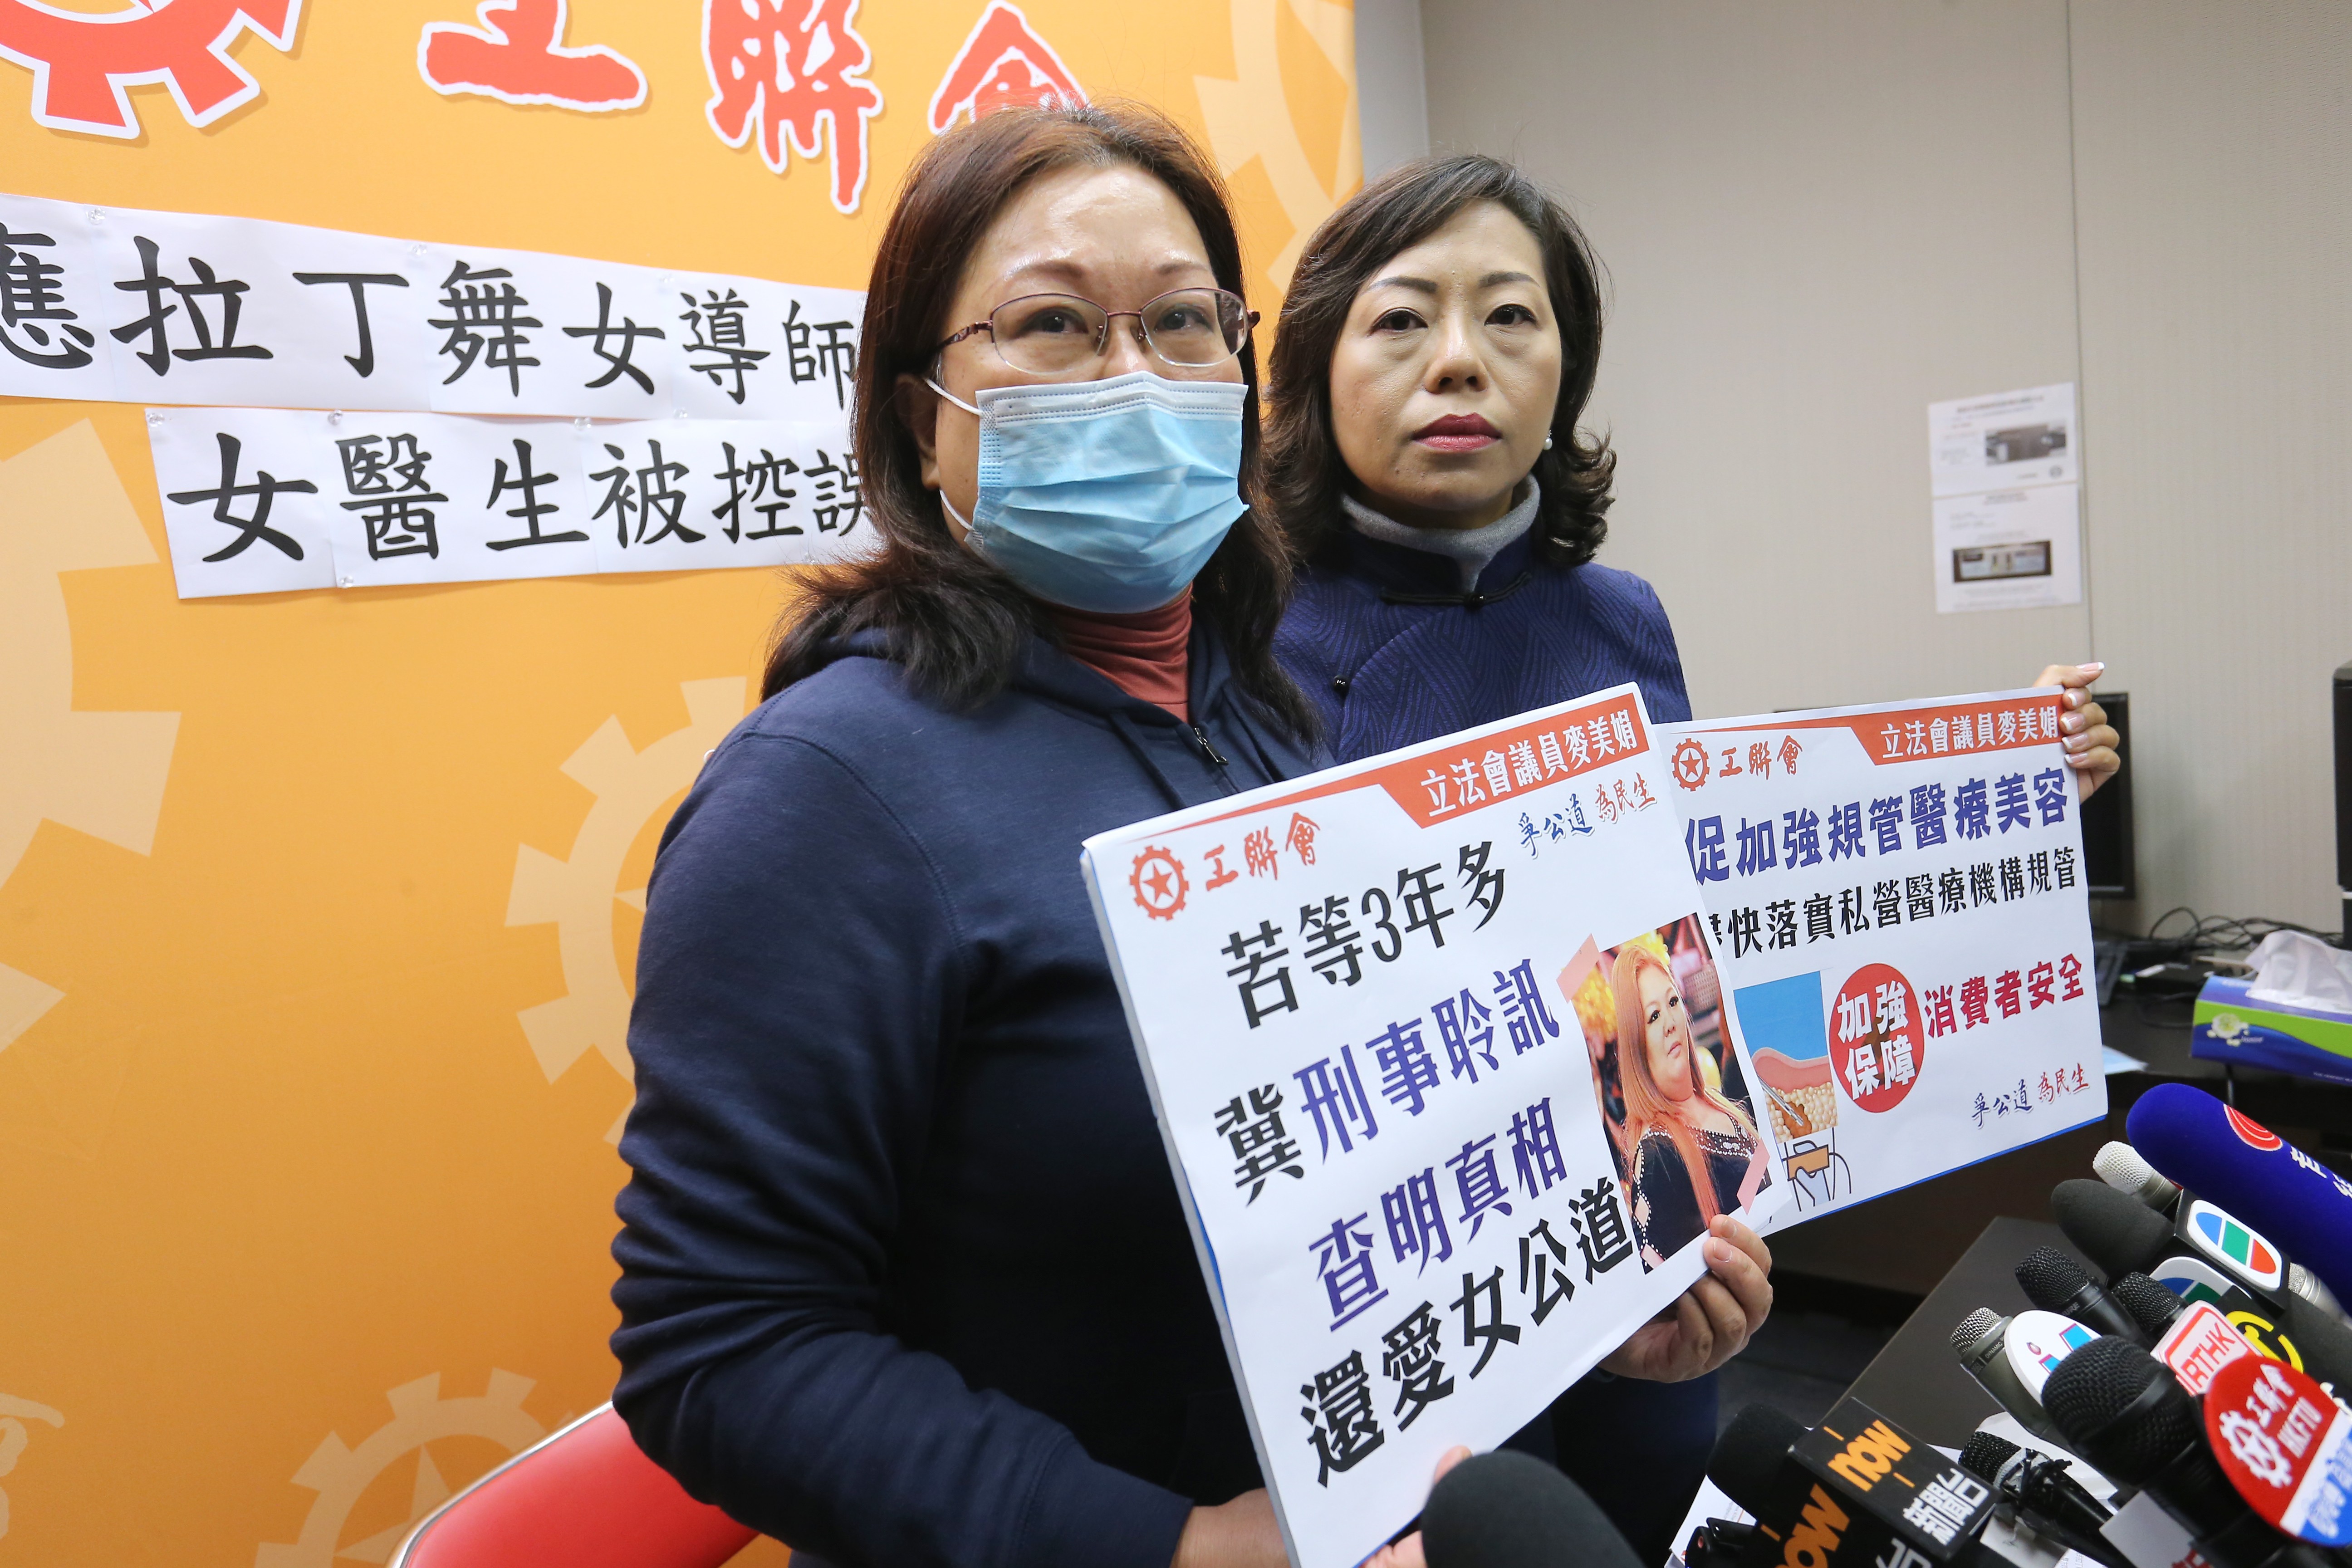 (From left) The victim’s mother, Miss Wong, at a press conference with lawmaker Alice Mak. Photo: Dickson Lee